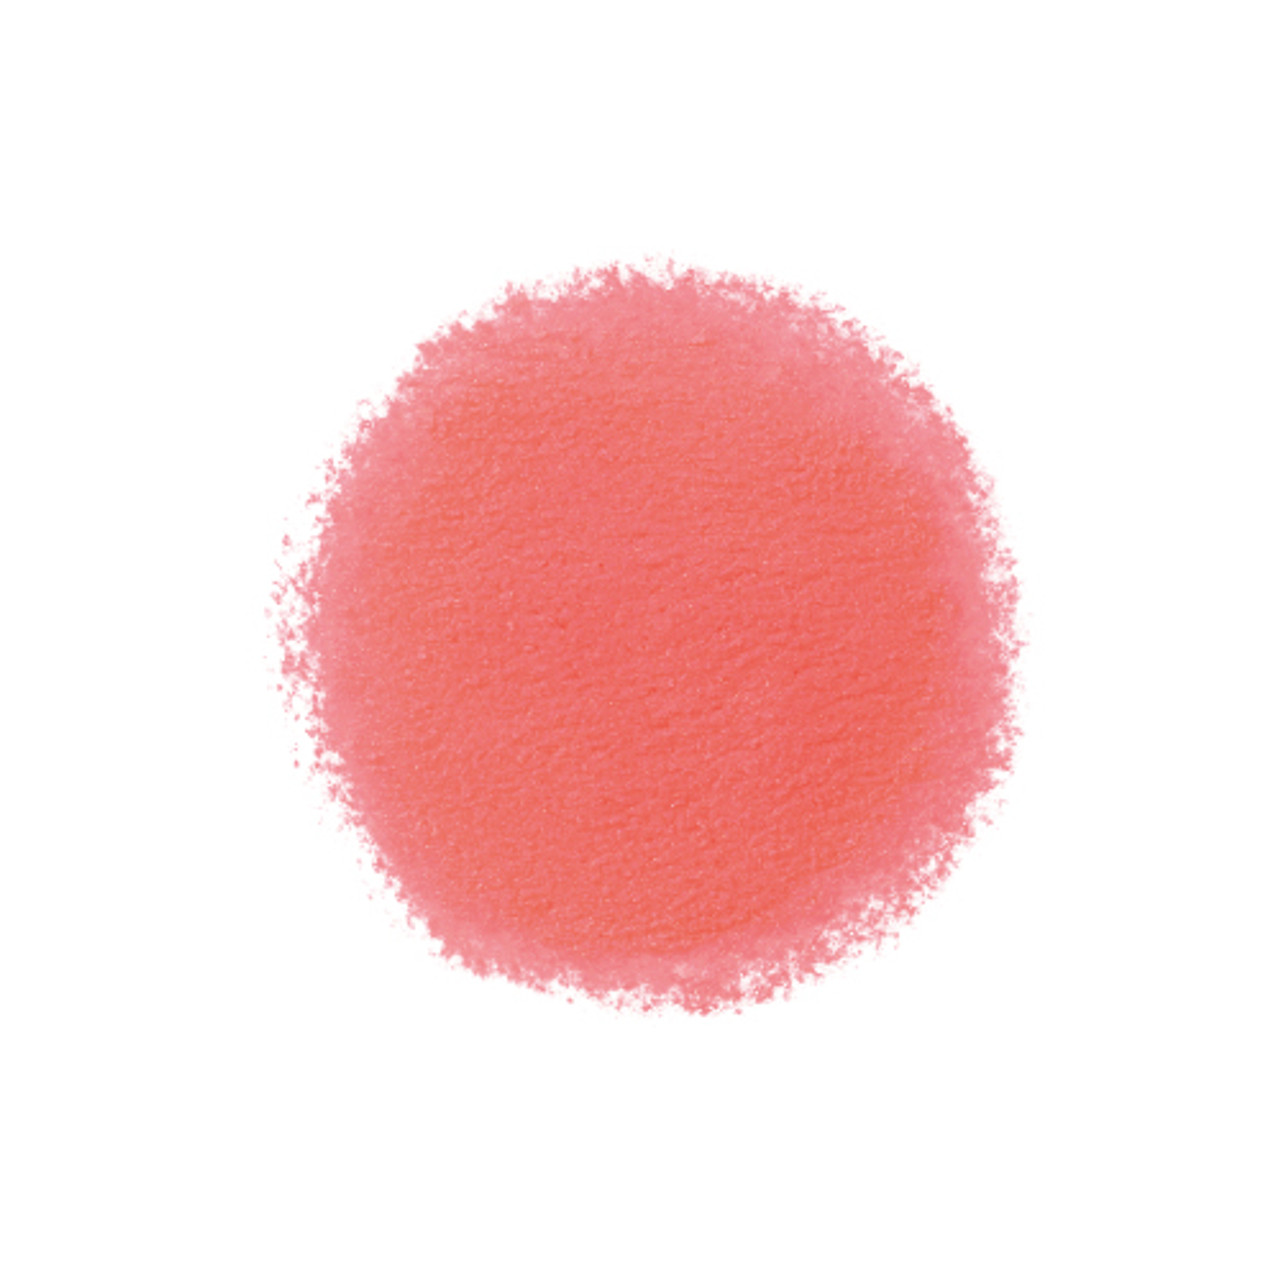 A patch of colour demonstrating the shade of Cheeky Baby 04, a doll-like candy pink, for when you want to look extra cute